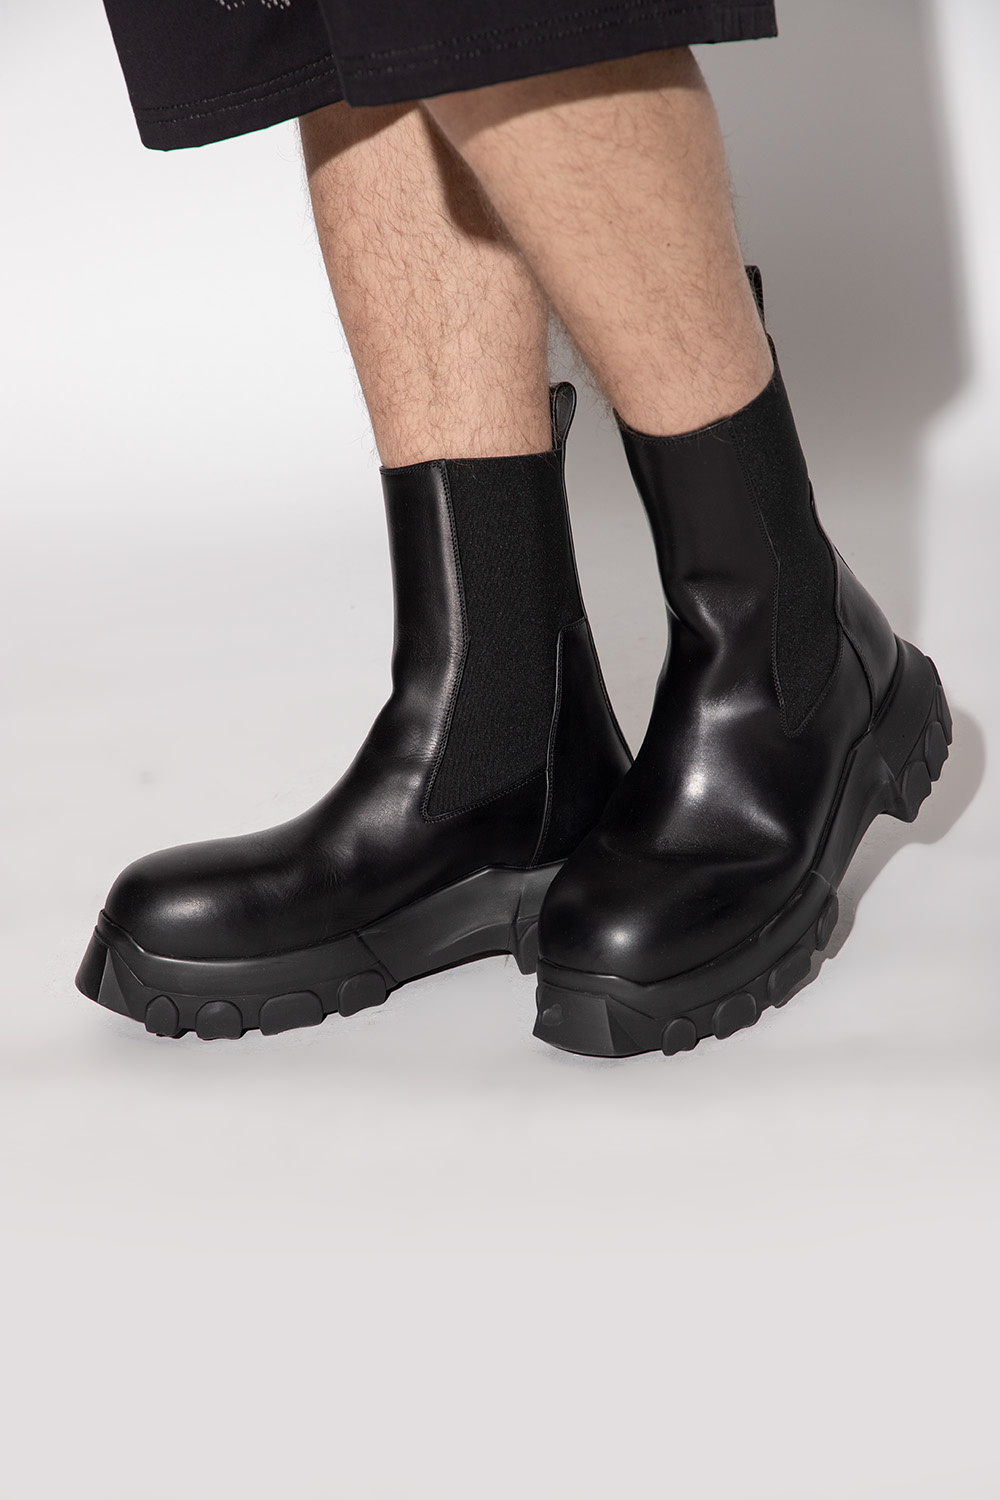 IetpShops Canada - Black 'Beatle Bozo Tractor' leather ankle boots 